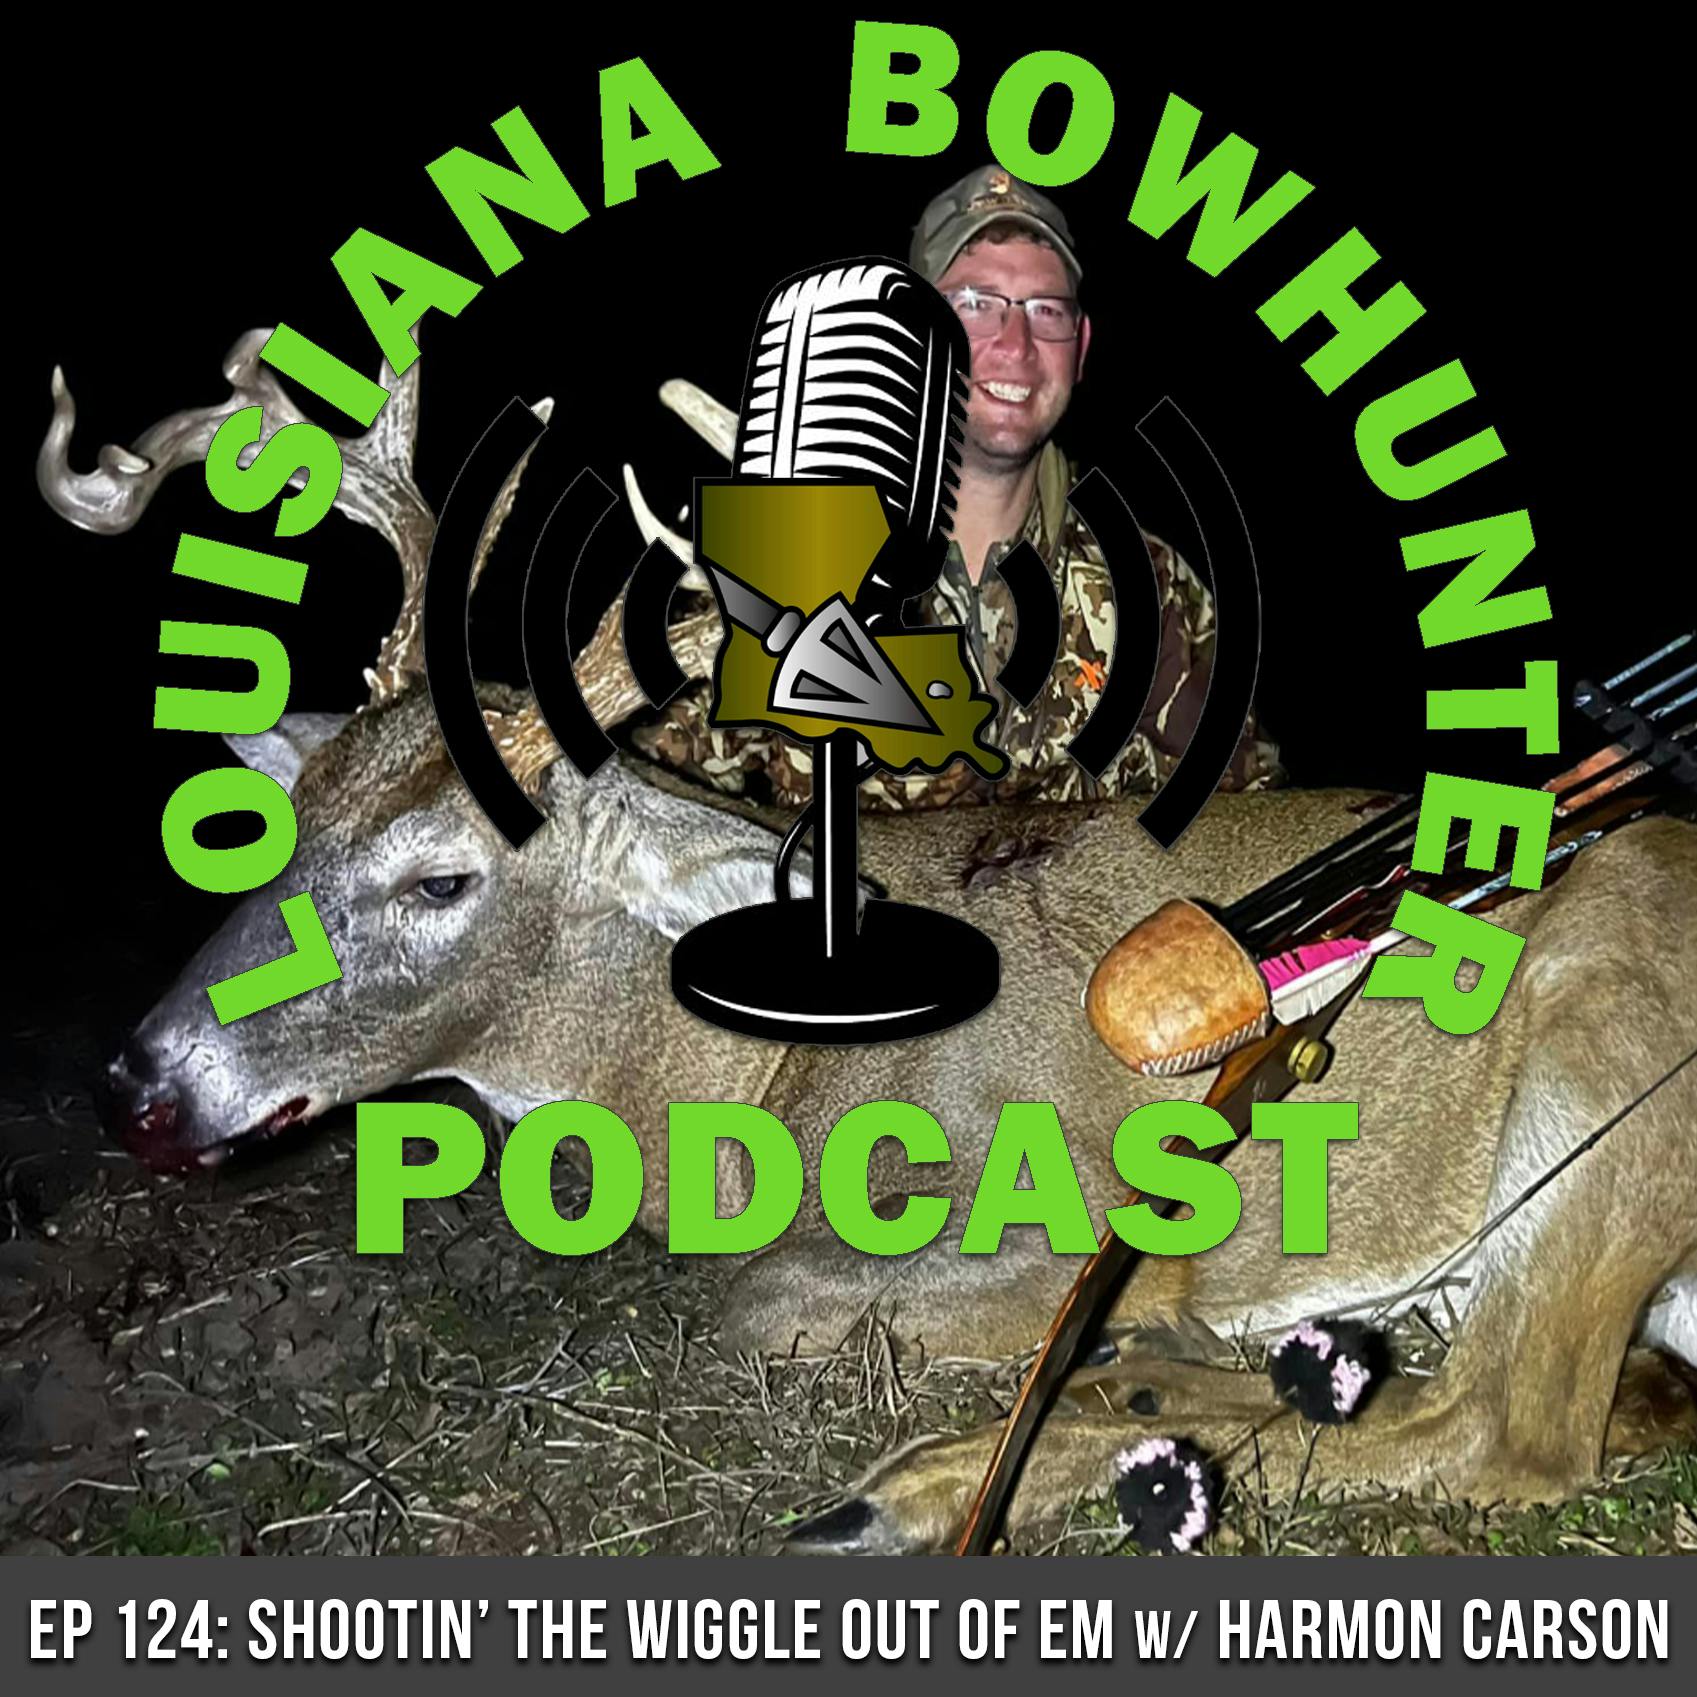 Episode 124: Shootin’ The Wiggle Out of Em w/ Harmon Carson